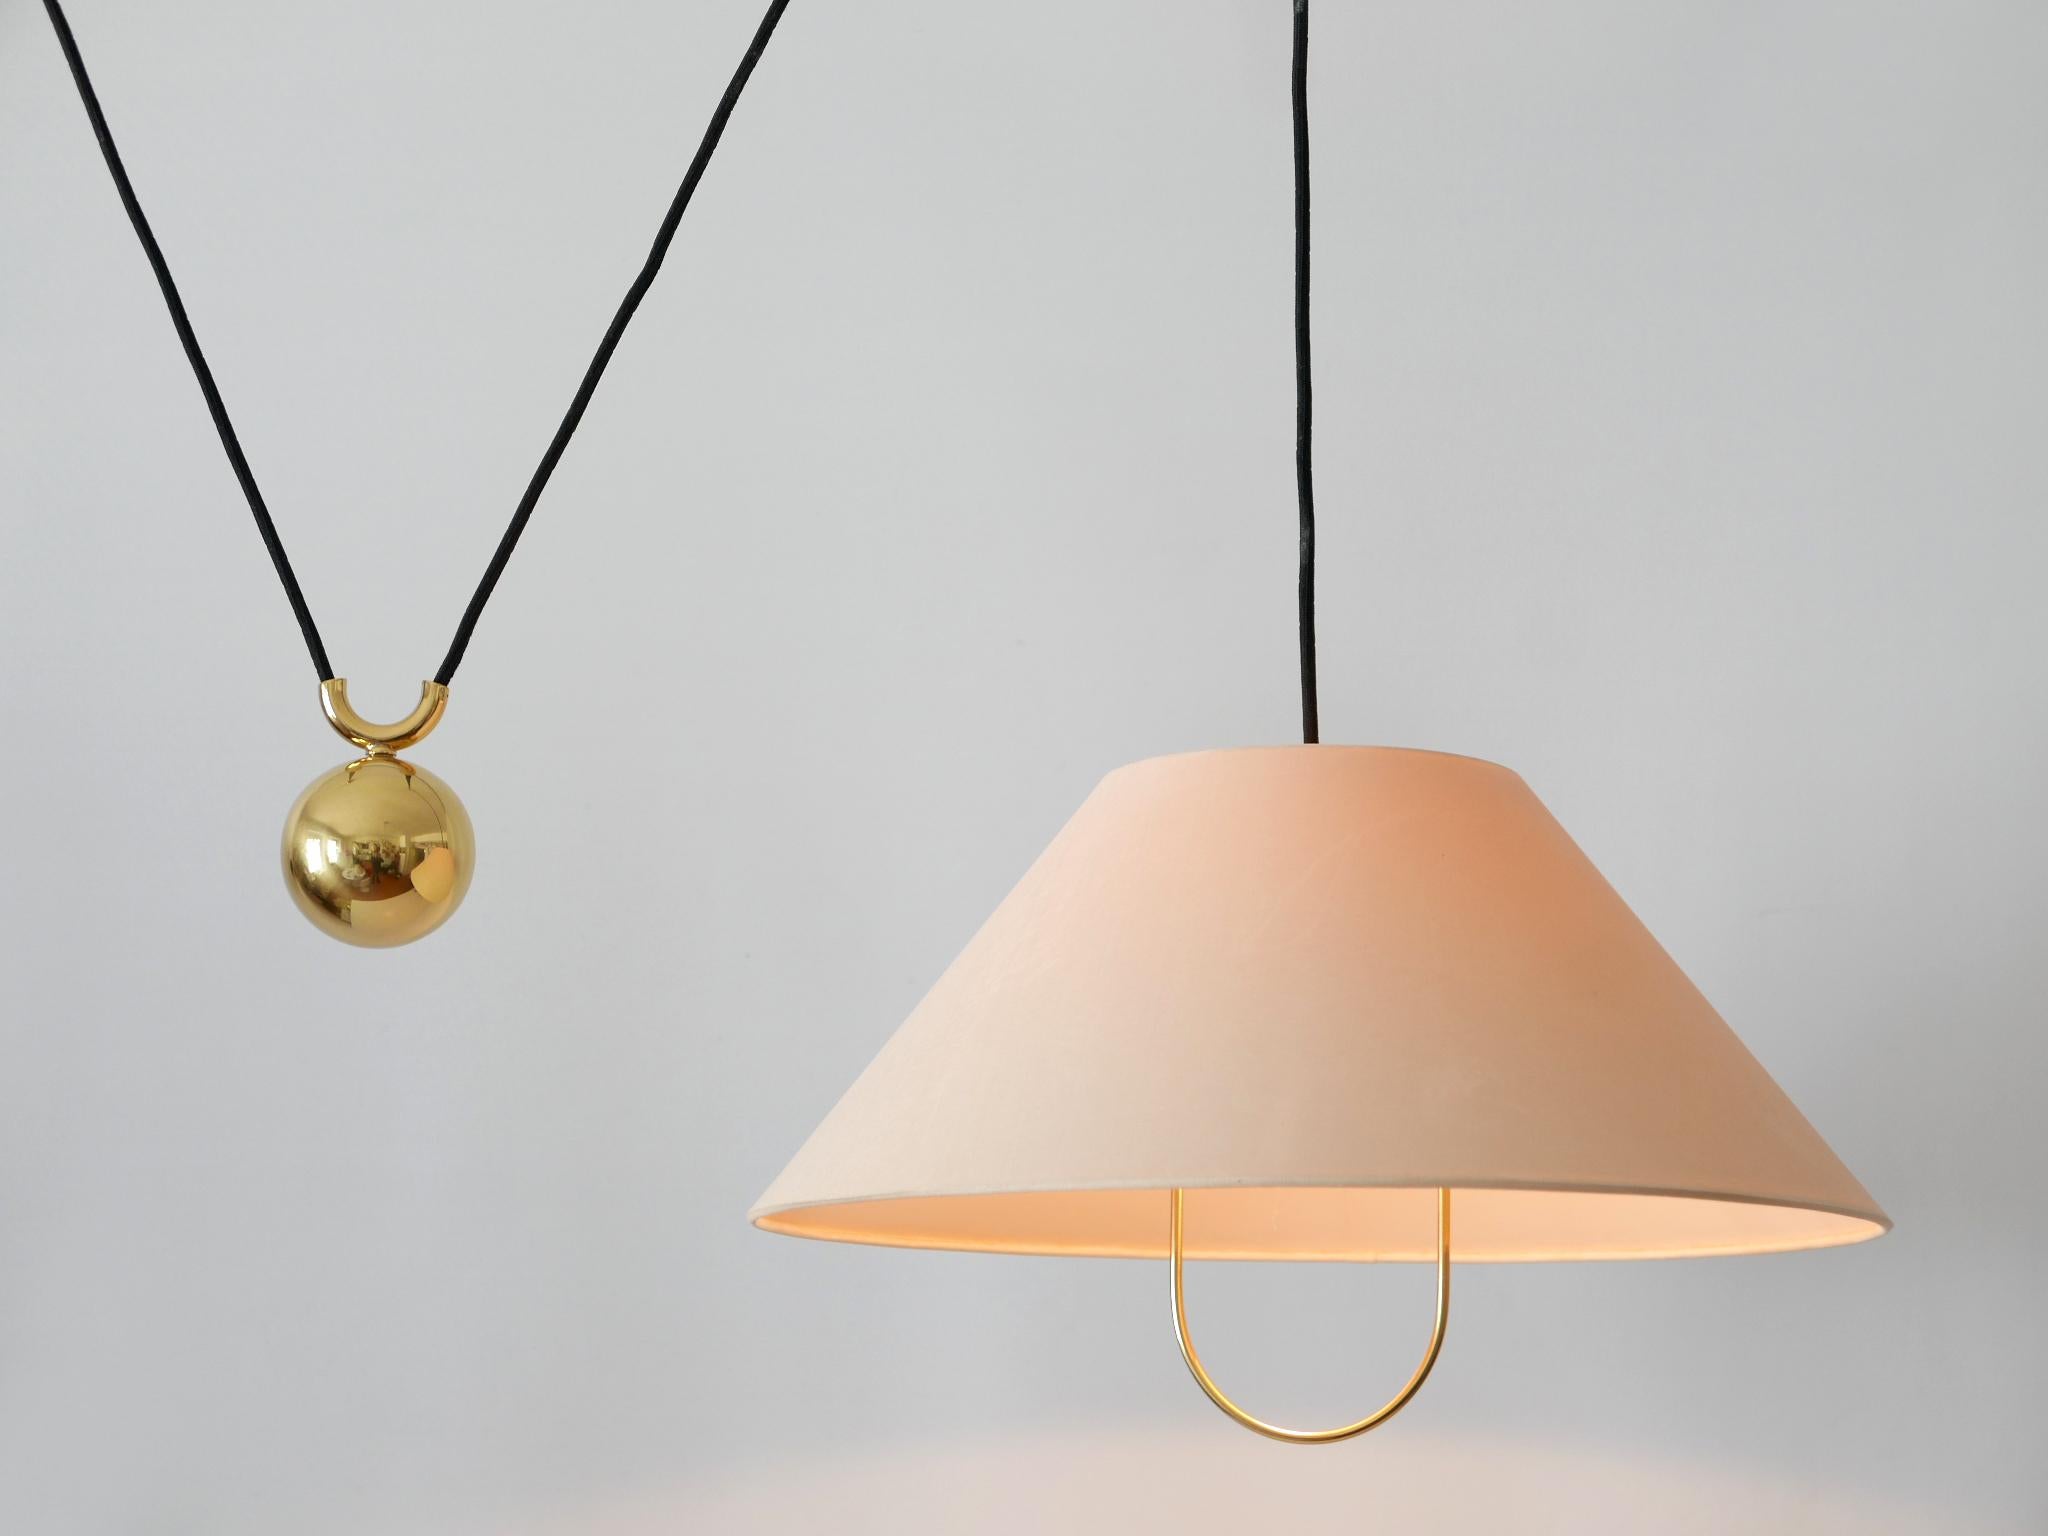 Brass Early, Rare & Elegant Counterweight Pendant Lamp by Florian Schulz Germany 1960s